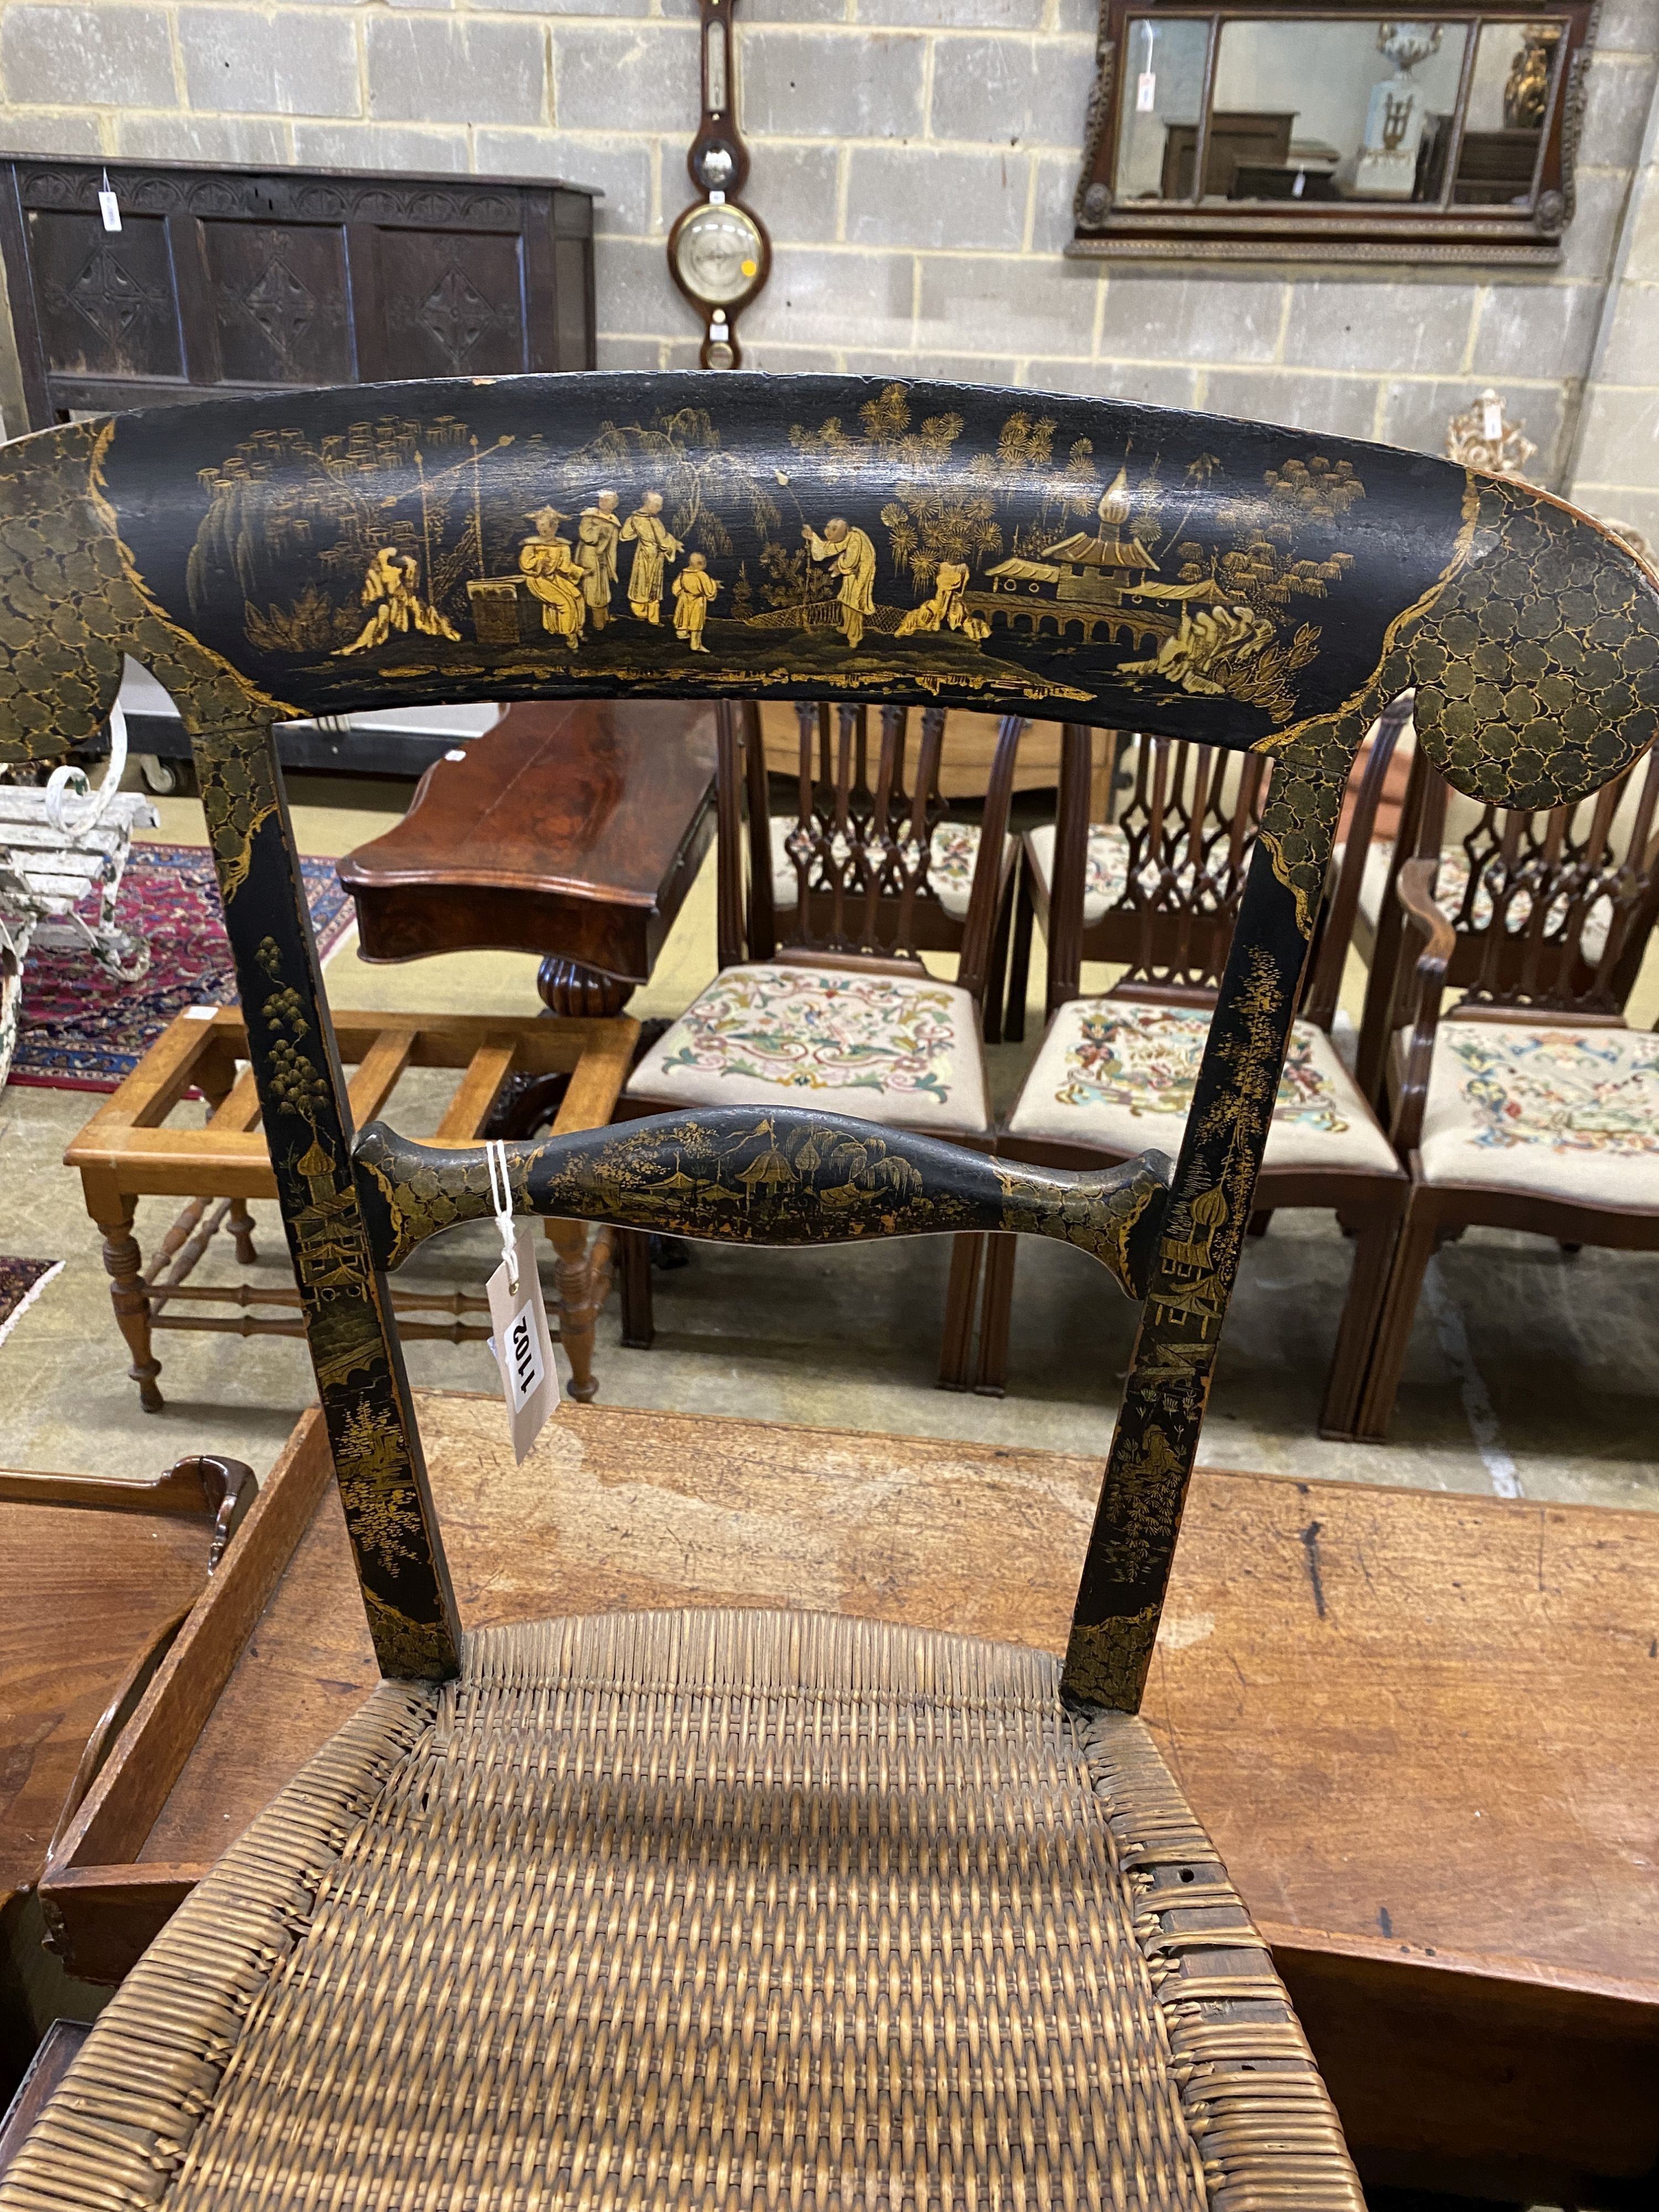 A 19th century chinoiserie lacquered bedroom chair